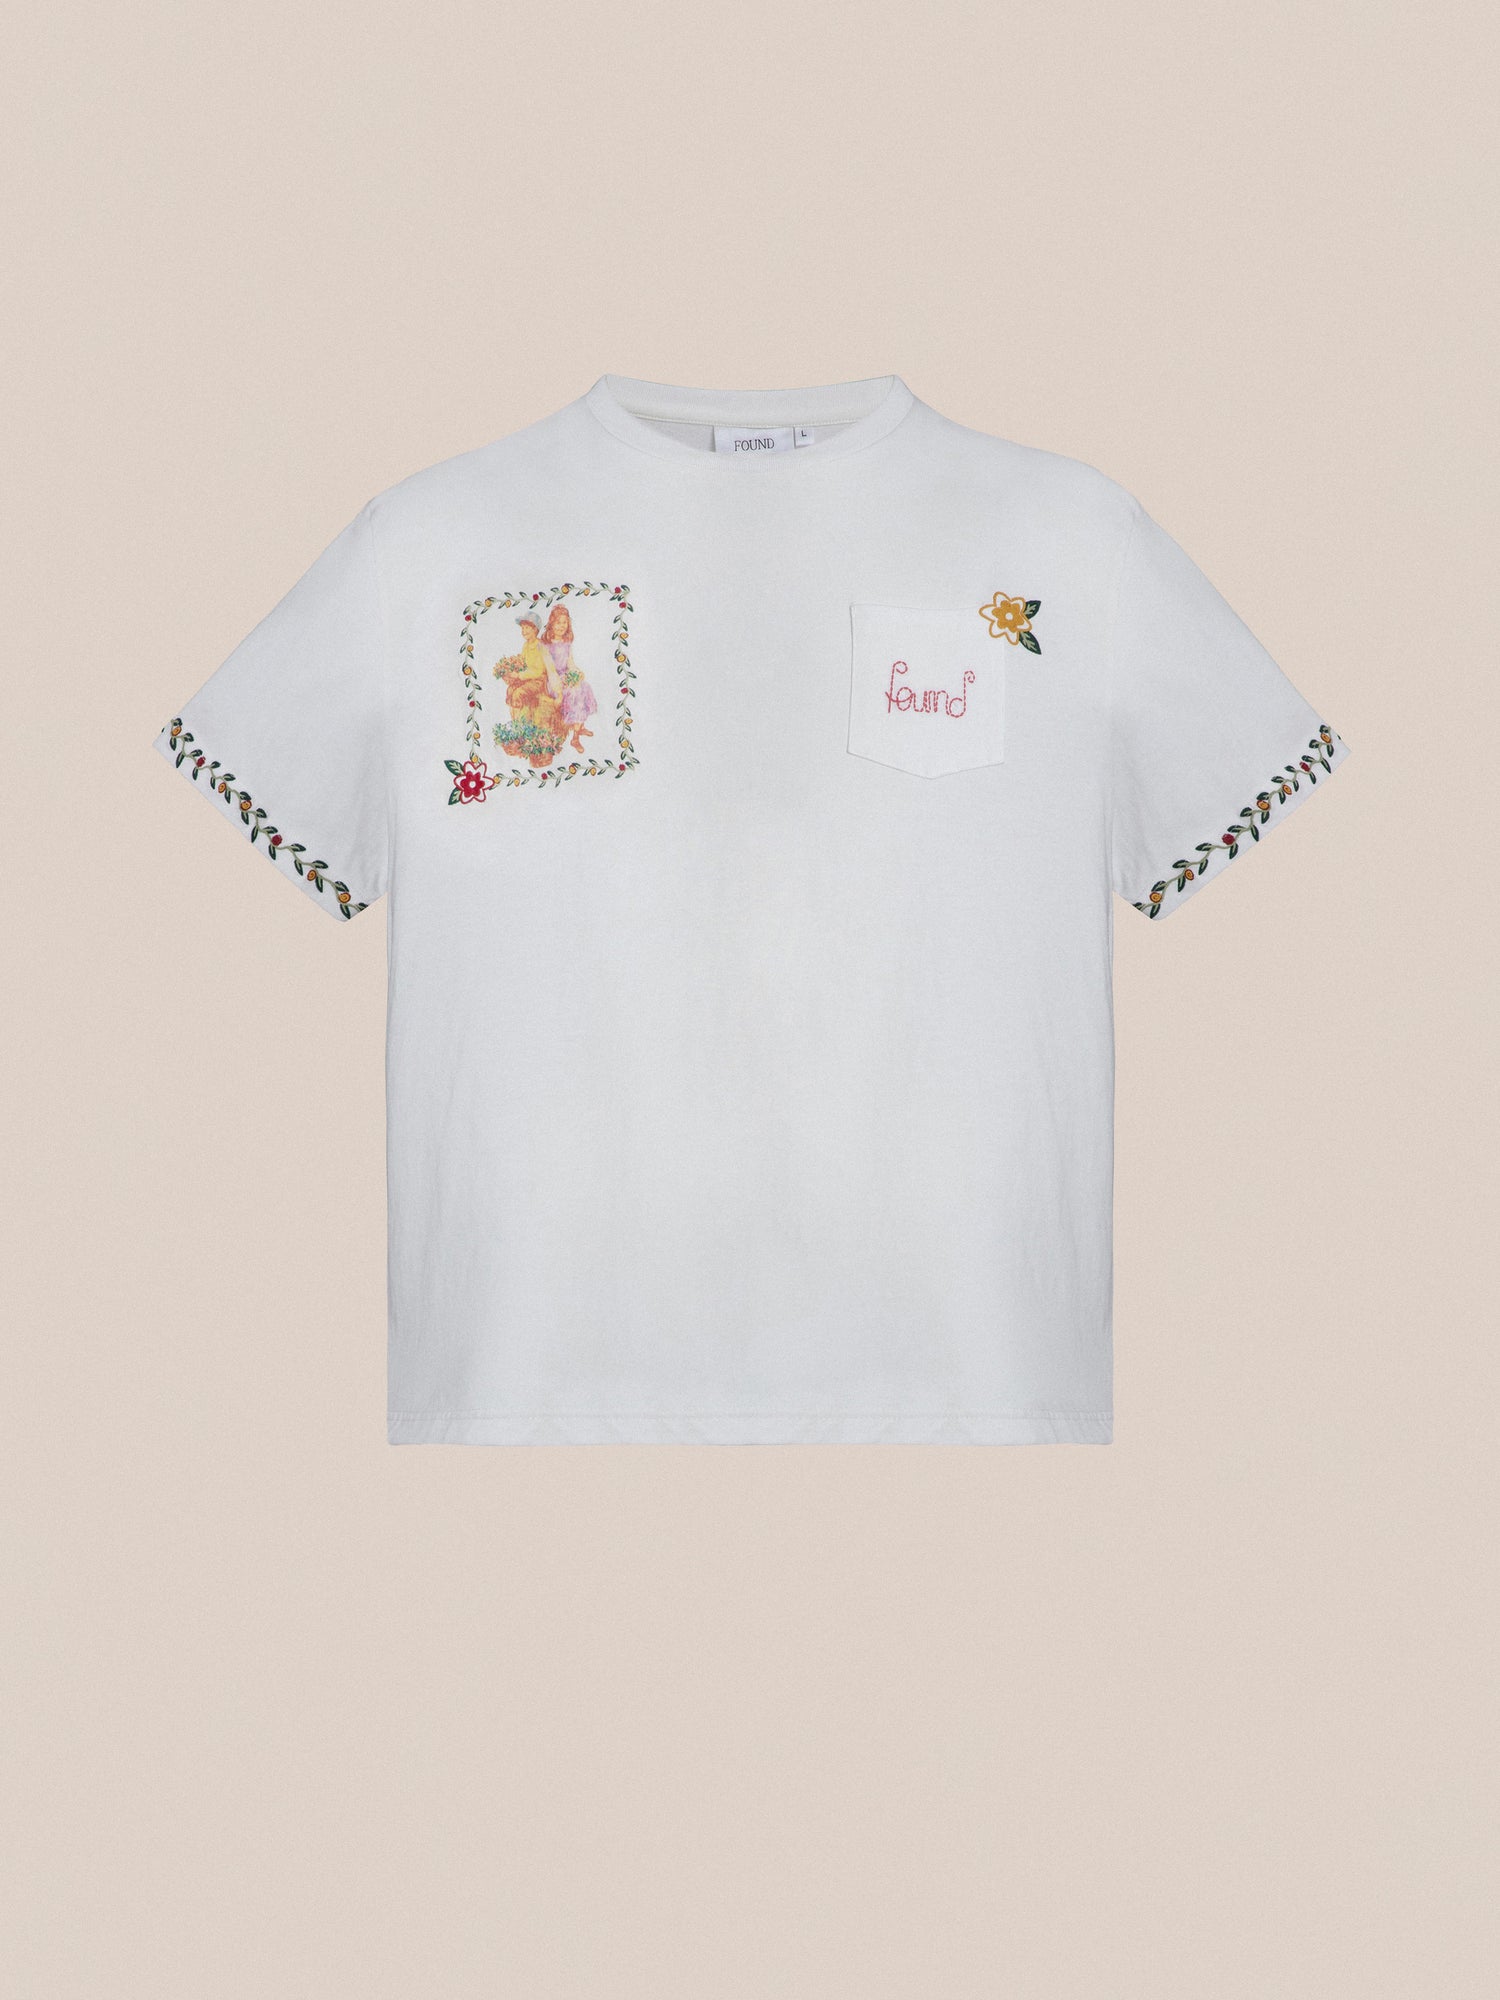 Embroidered cotton Flower Children Tee in white with floral Phulkari style embroideries - gallery image 1 by Found.